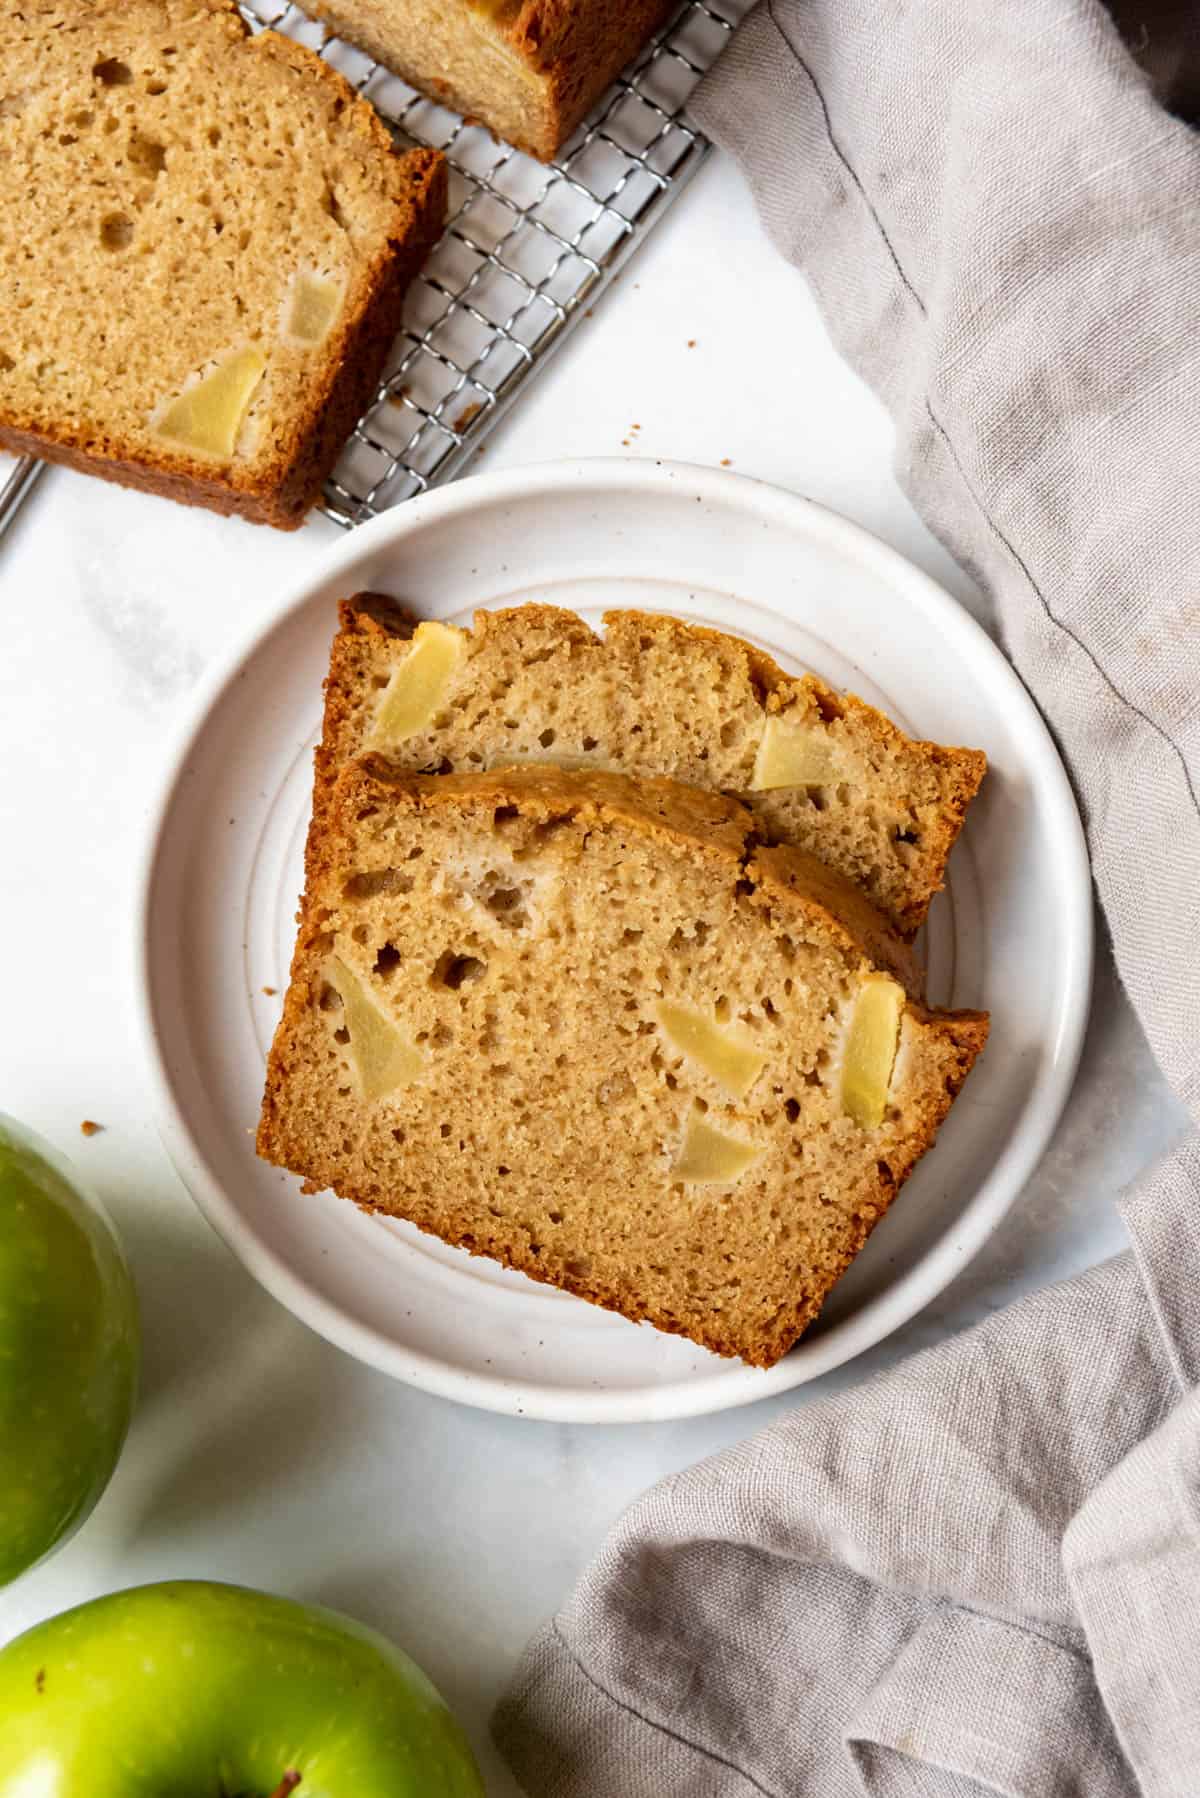 Two slices of apple ginger quick bread on a plate.